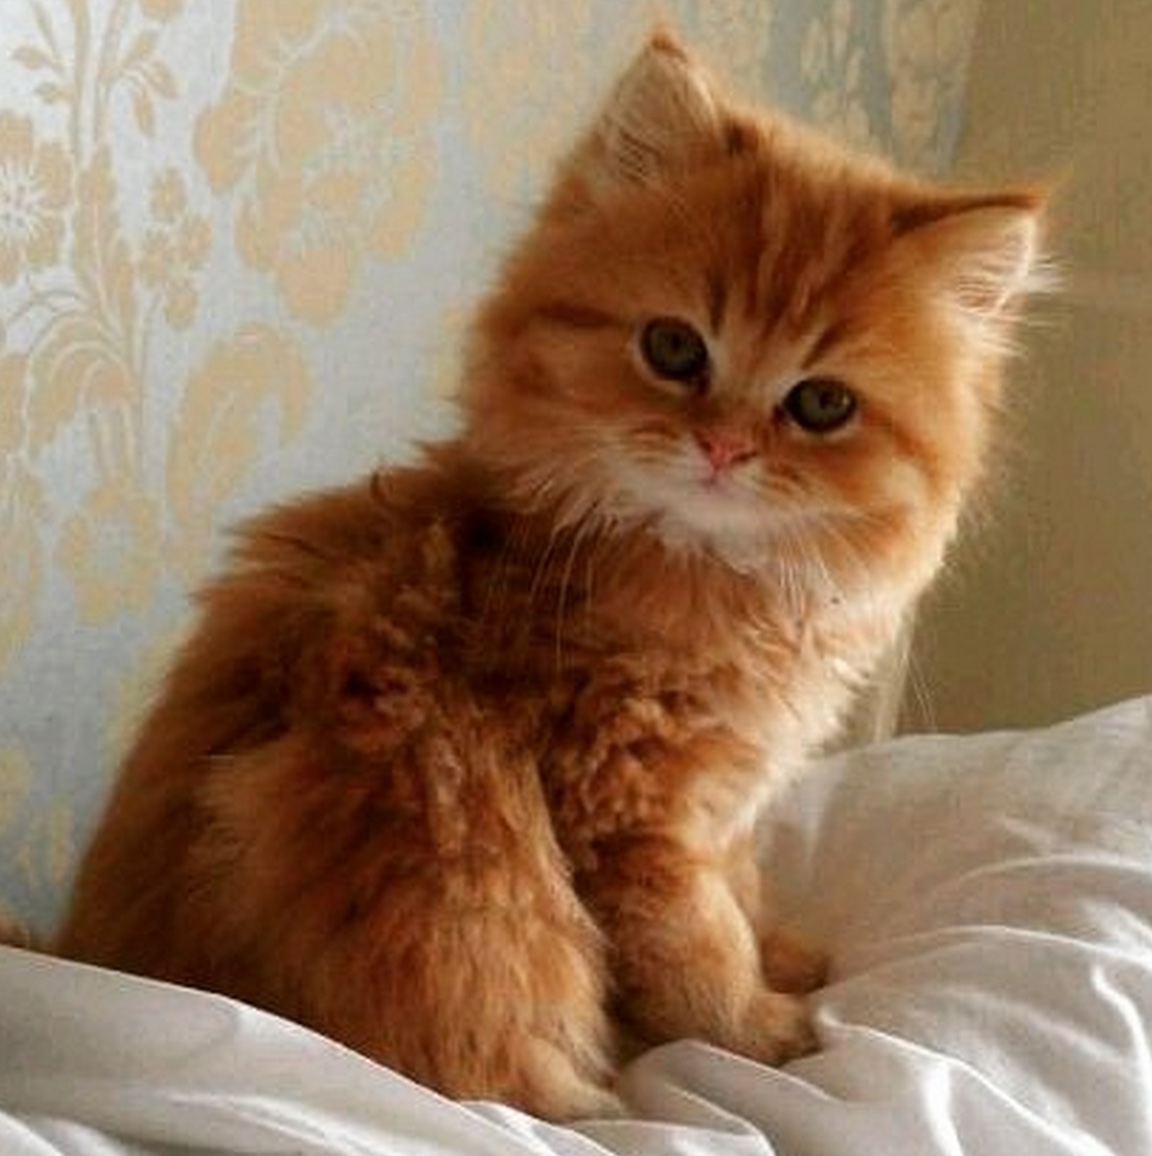 What a ginger cutie!